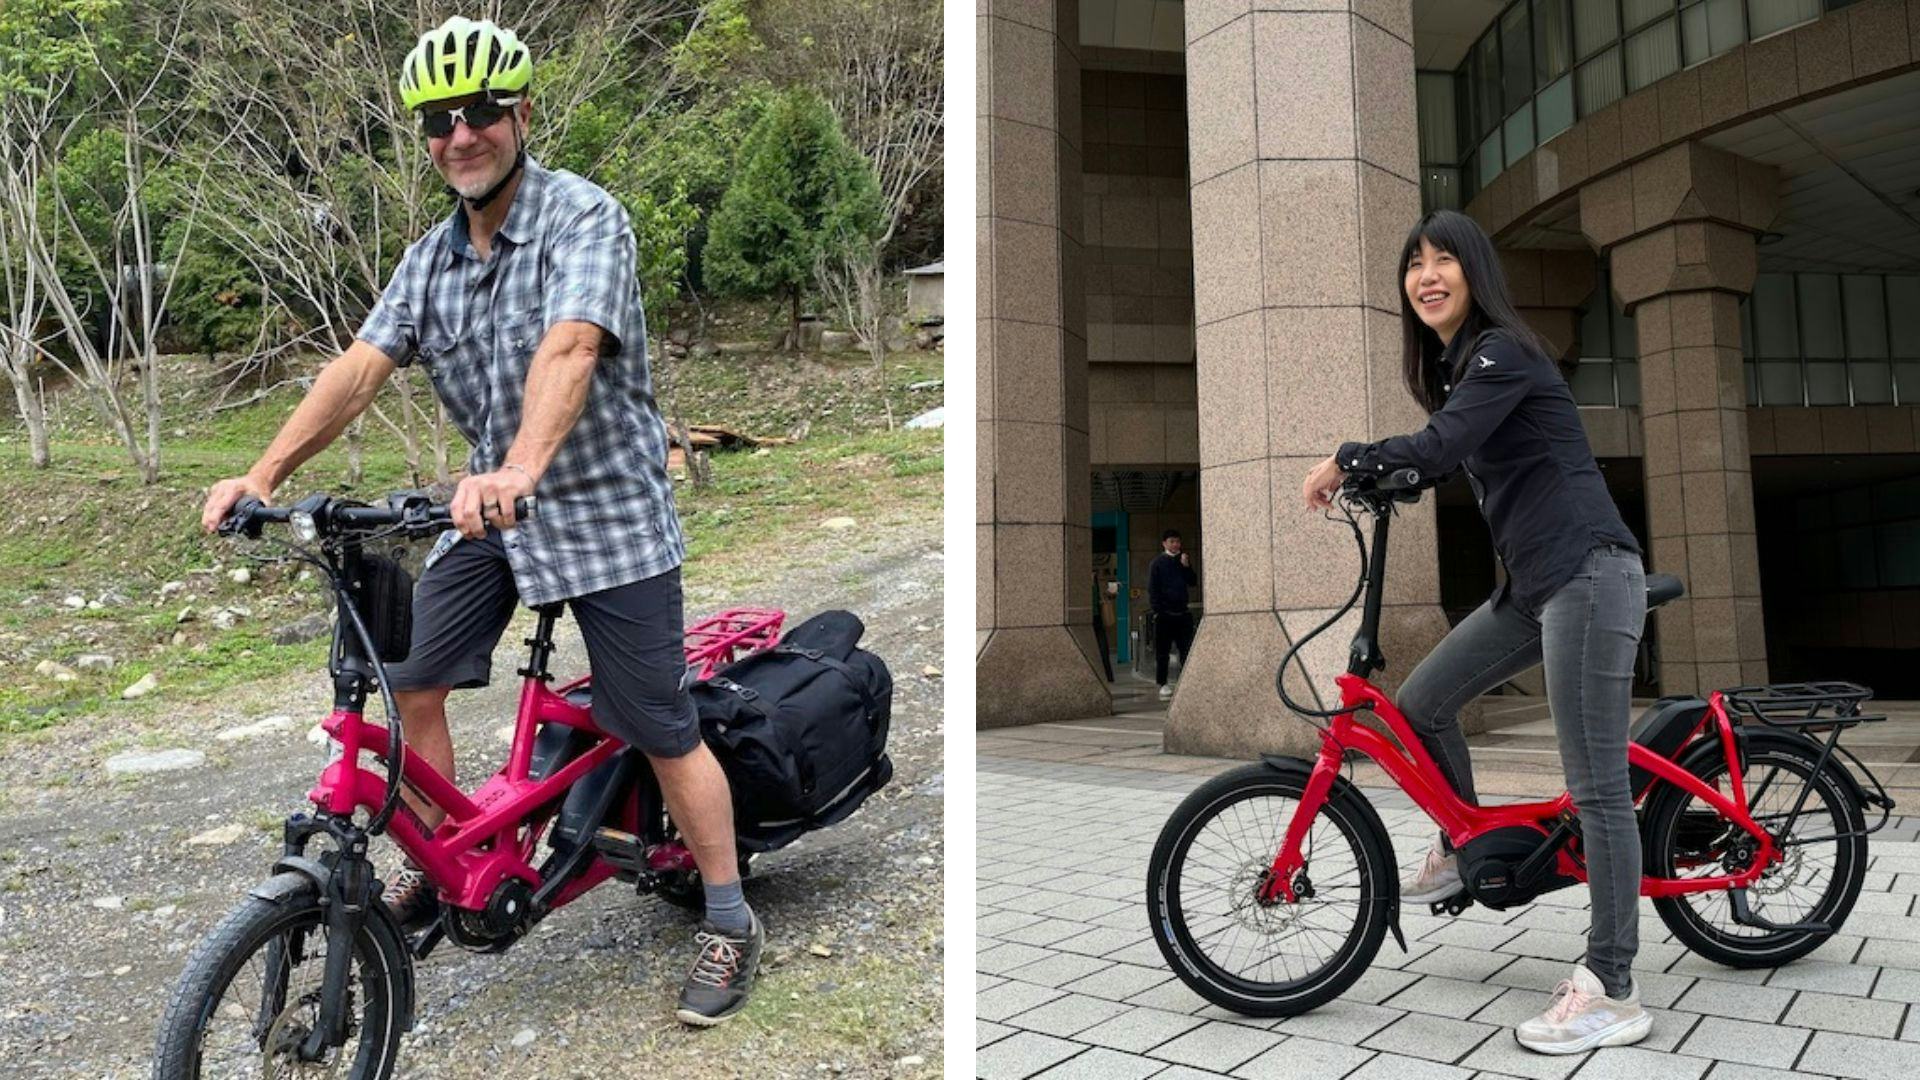 "We’re really excited to be able to add two such seasoned bike professionals to the Tern team,” said Josh Hon, Tern Team Captain.